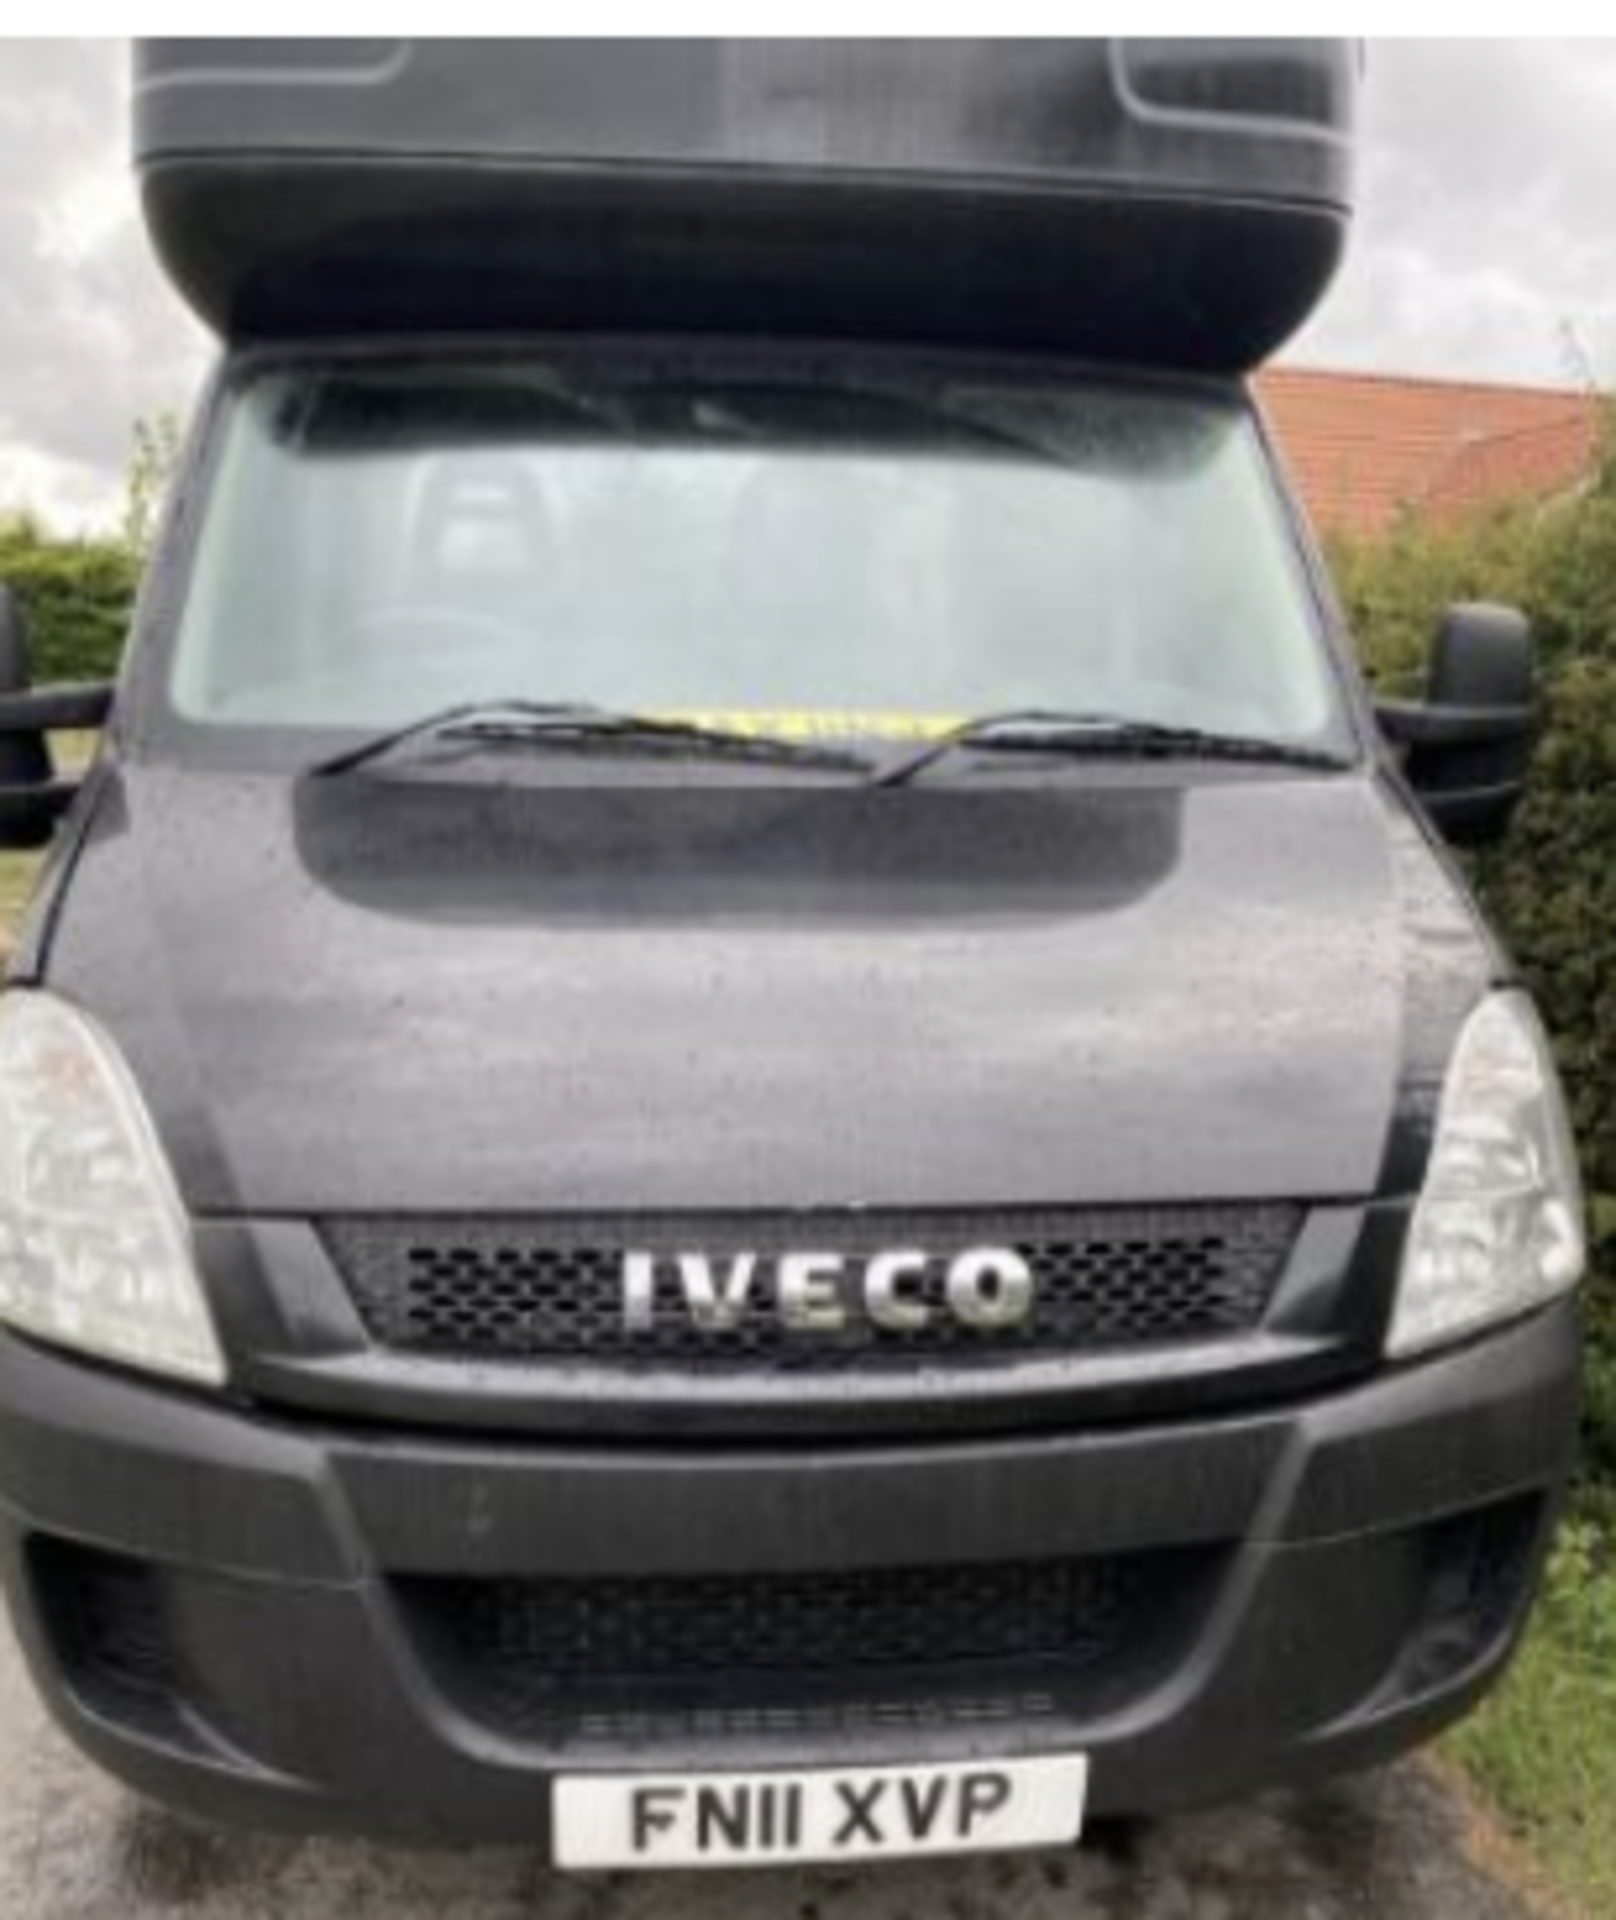 IVECO  DAILY 50C15 5.2 TON RECOVERY TRUCK YEAR 2011. LOCATION NORTH YORKSHIRE. - Image 5 of 14